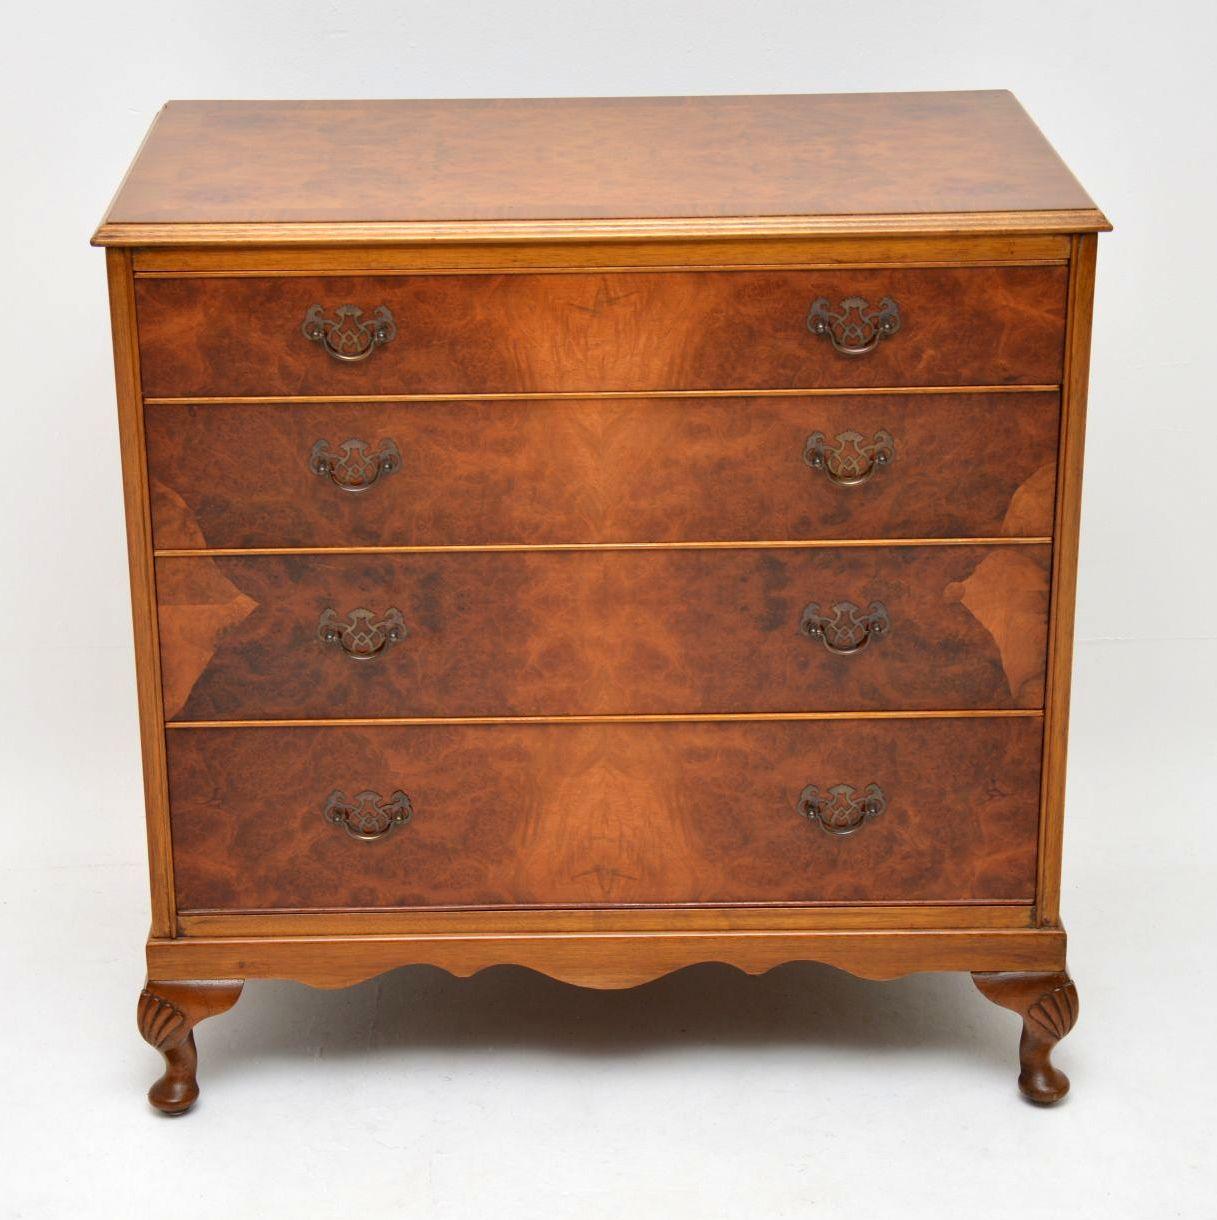 This antique chest of drawers has a burr walnut top and front section, with cross banding on the top. The burr walnut shows a lovely pattern running down all the drawers which are graduated in depth and have original brass handles. This chest is in